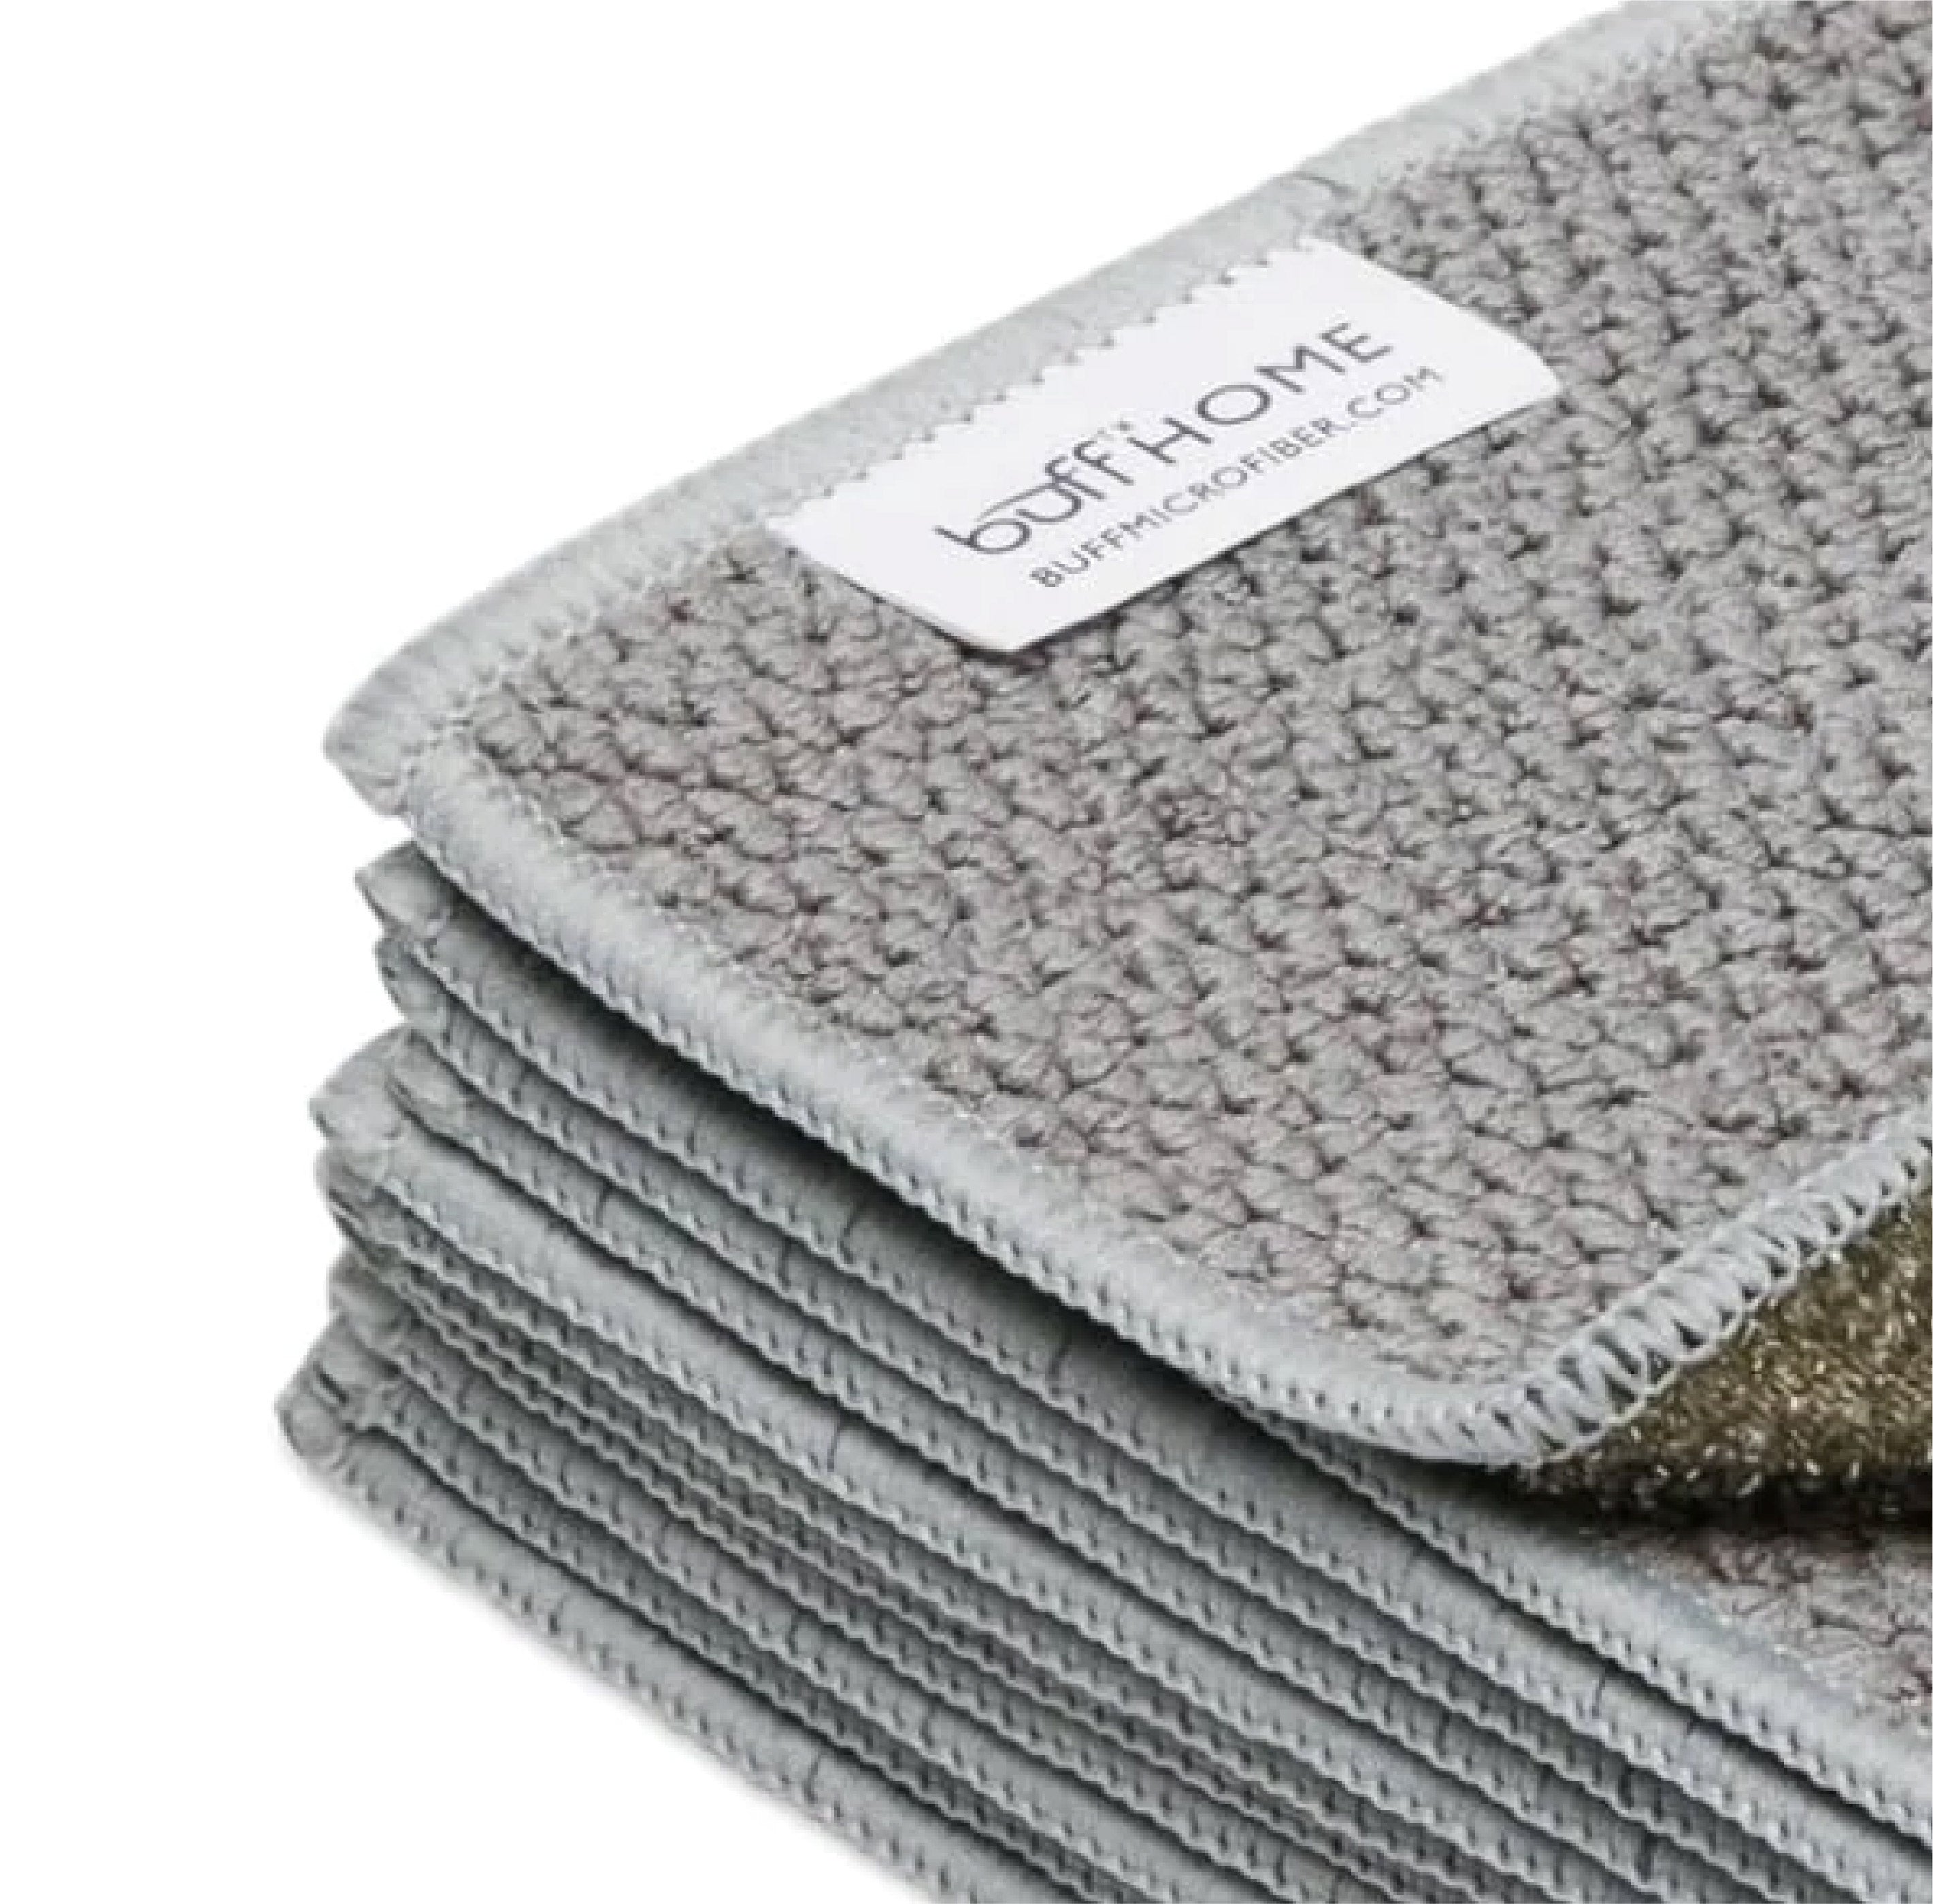 Dish Cloths for Washing Dishes Gray Kitchen Cloths Cleaning Cloths 12x12  - 4 Pack